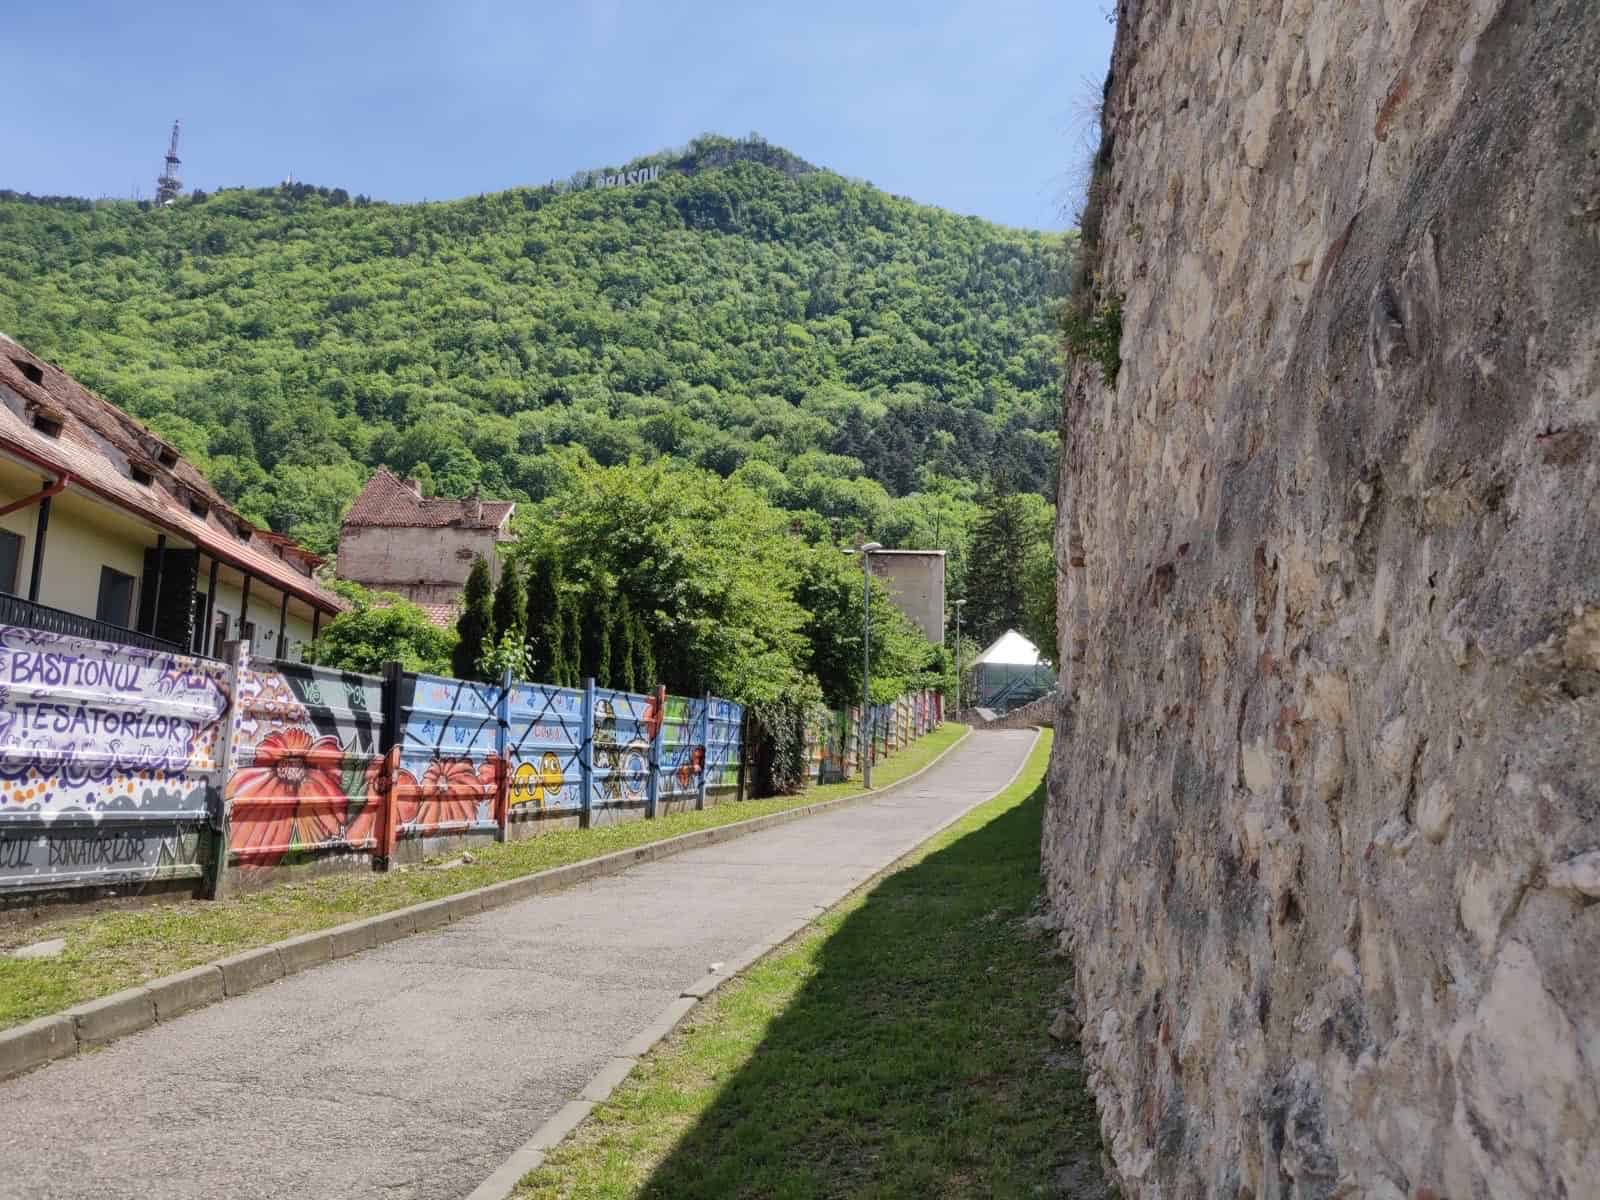 The old city walls, and a view up Mount Tâmpa